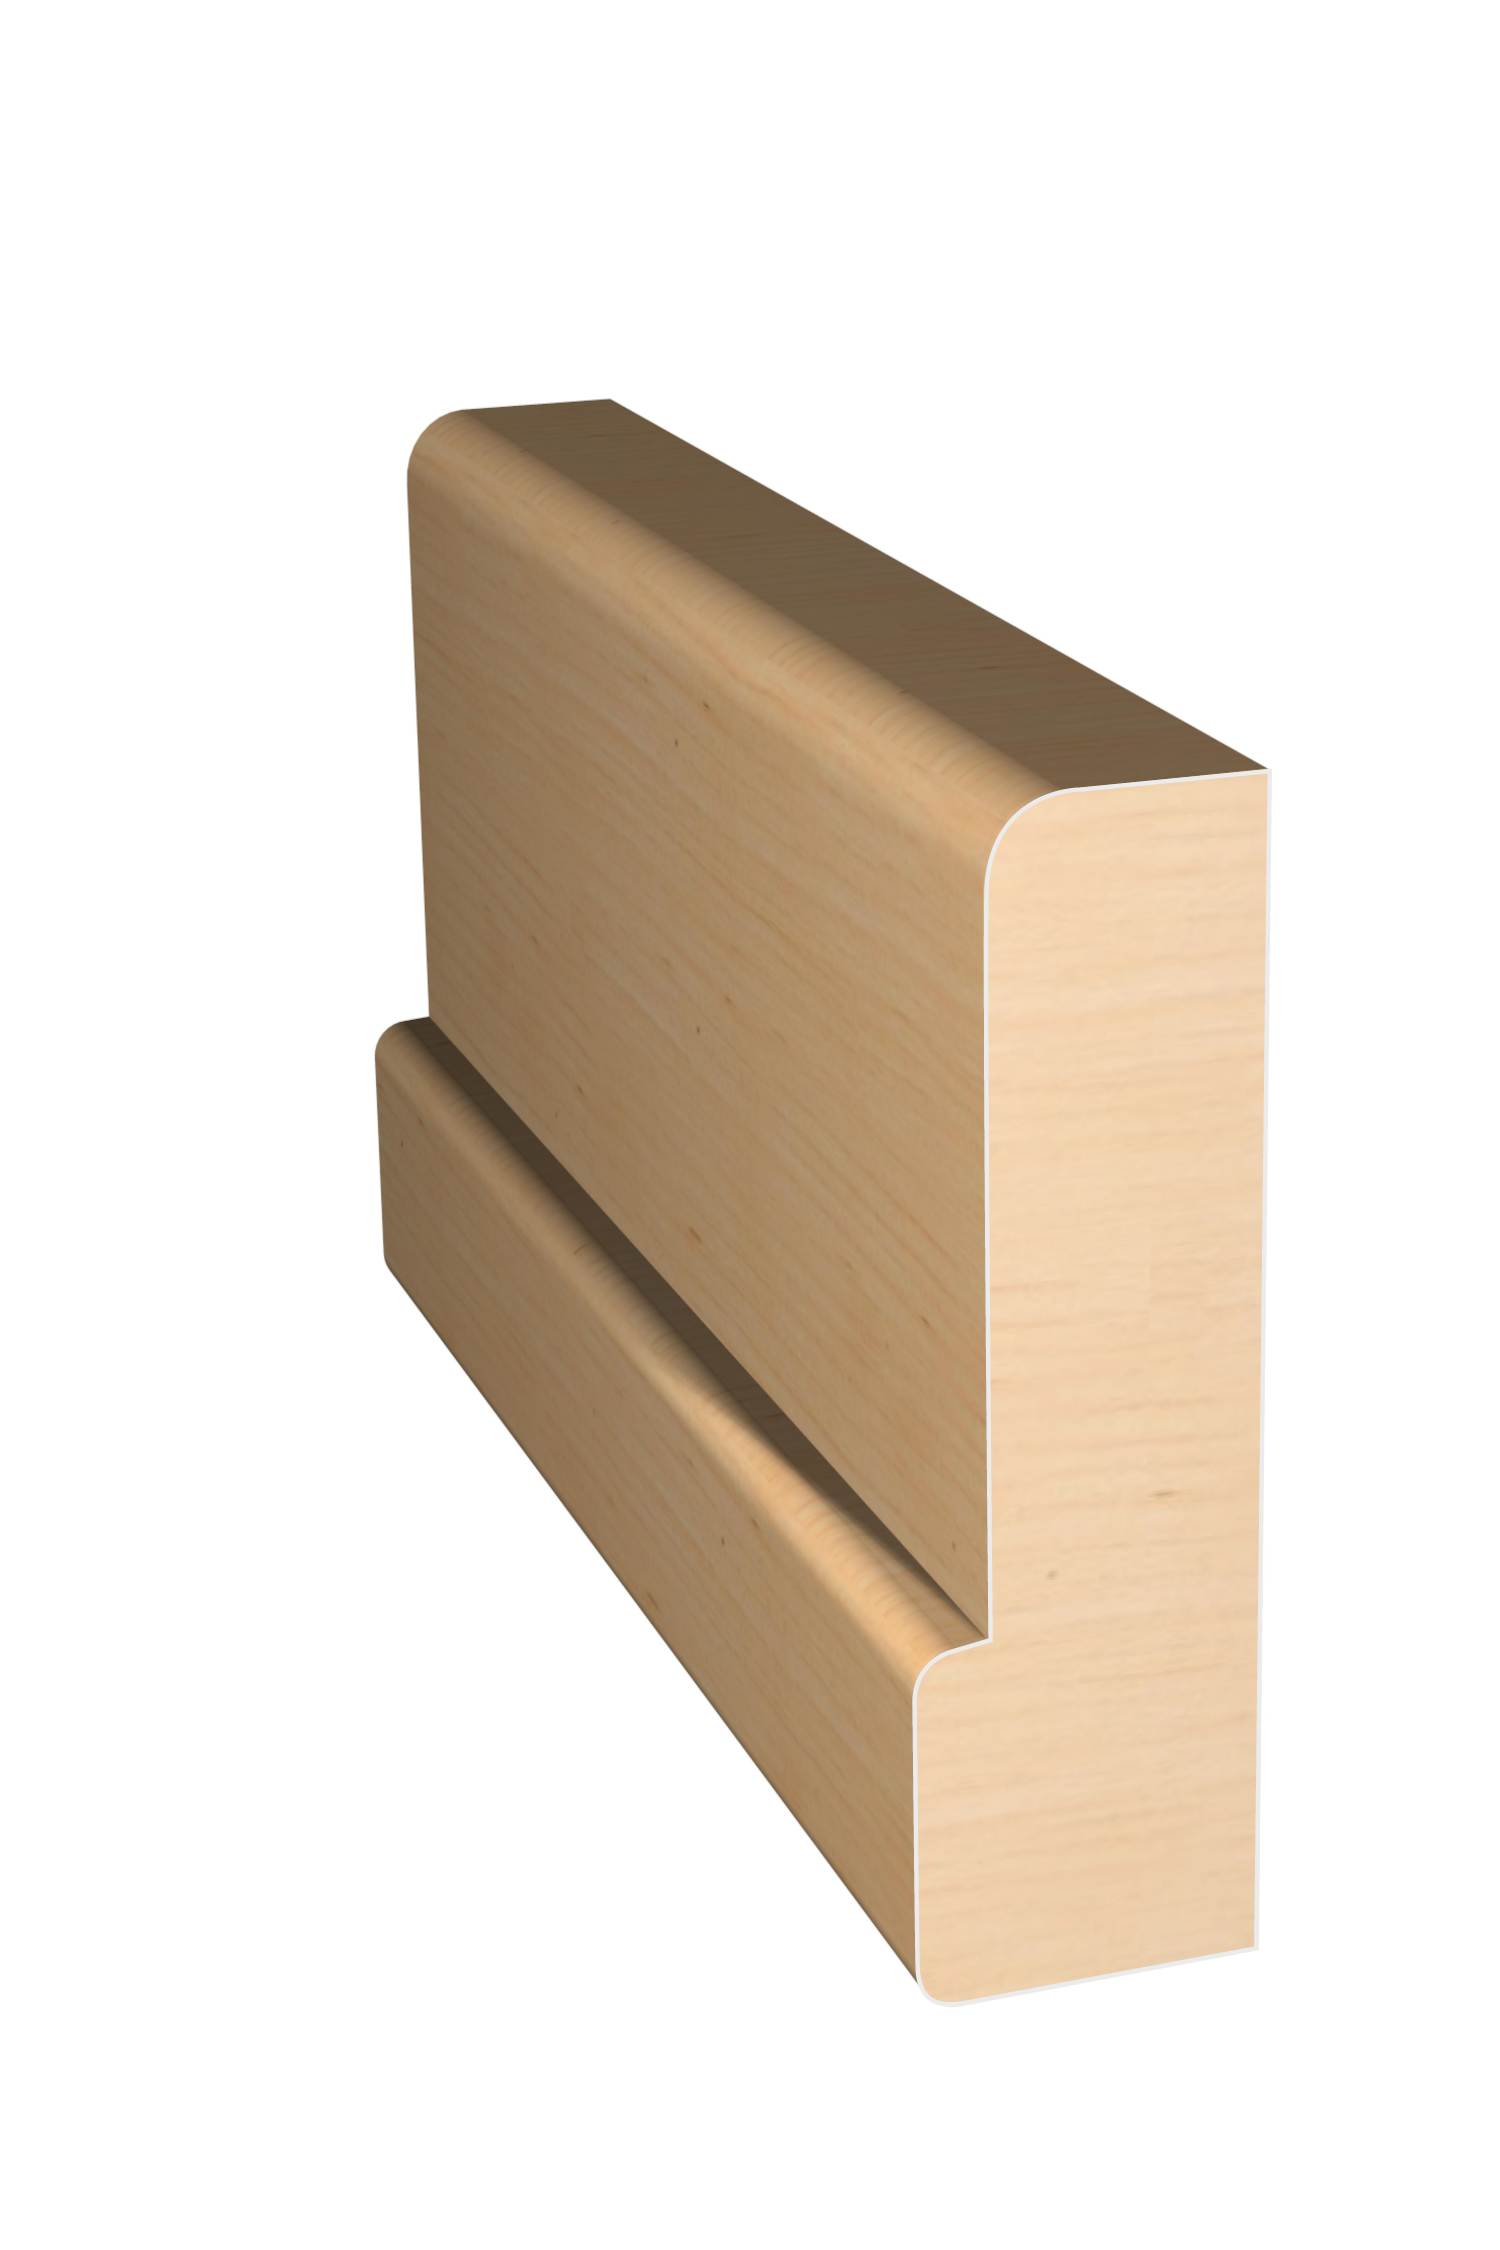 Three dimensional rendering of custom casing wood molding CAPL31432 made by Public Lumber Company in Detroit.